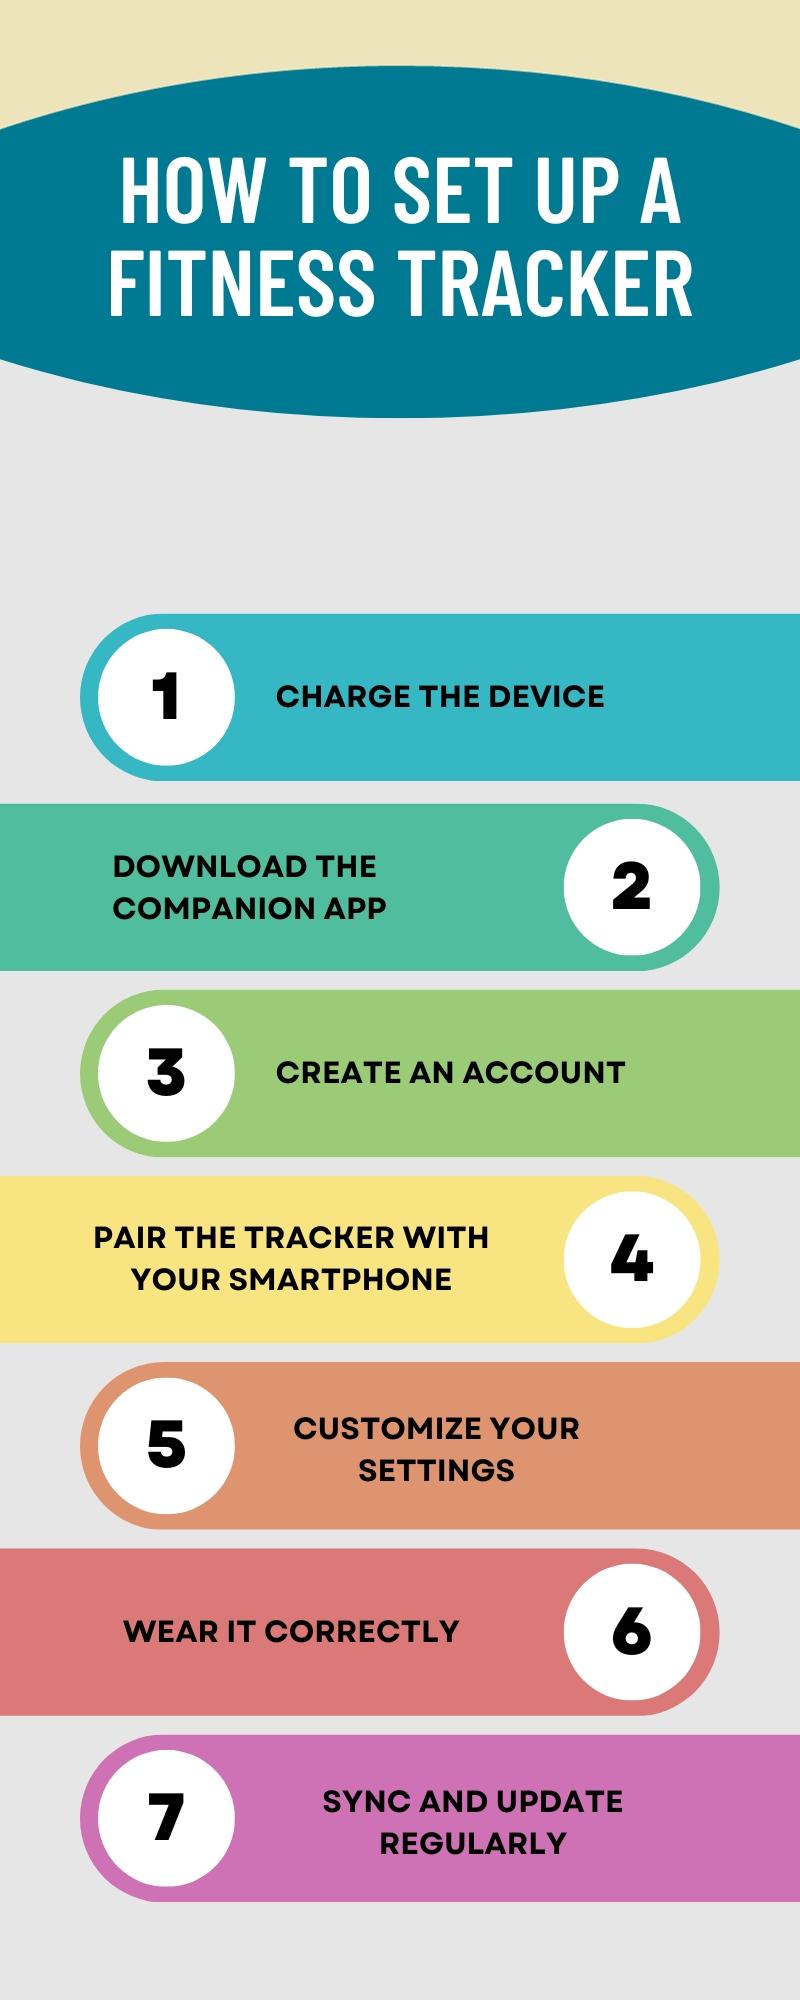 The infographic shows steps on how to set up a fitness tracker. These steps include charging the device, downloading the companion app, creating an account, pairing the tracker with your smartphone, customizing your settings, wearing it correctly, syncing, and updating regularly.